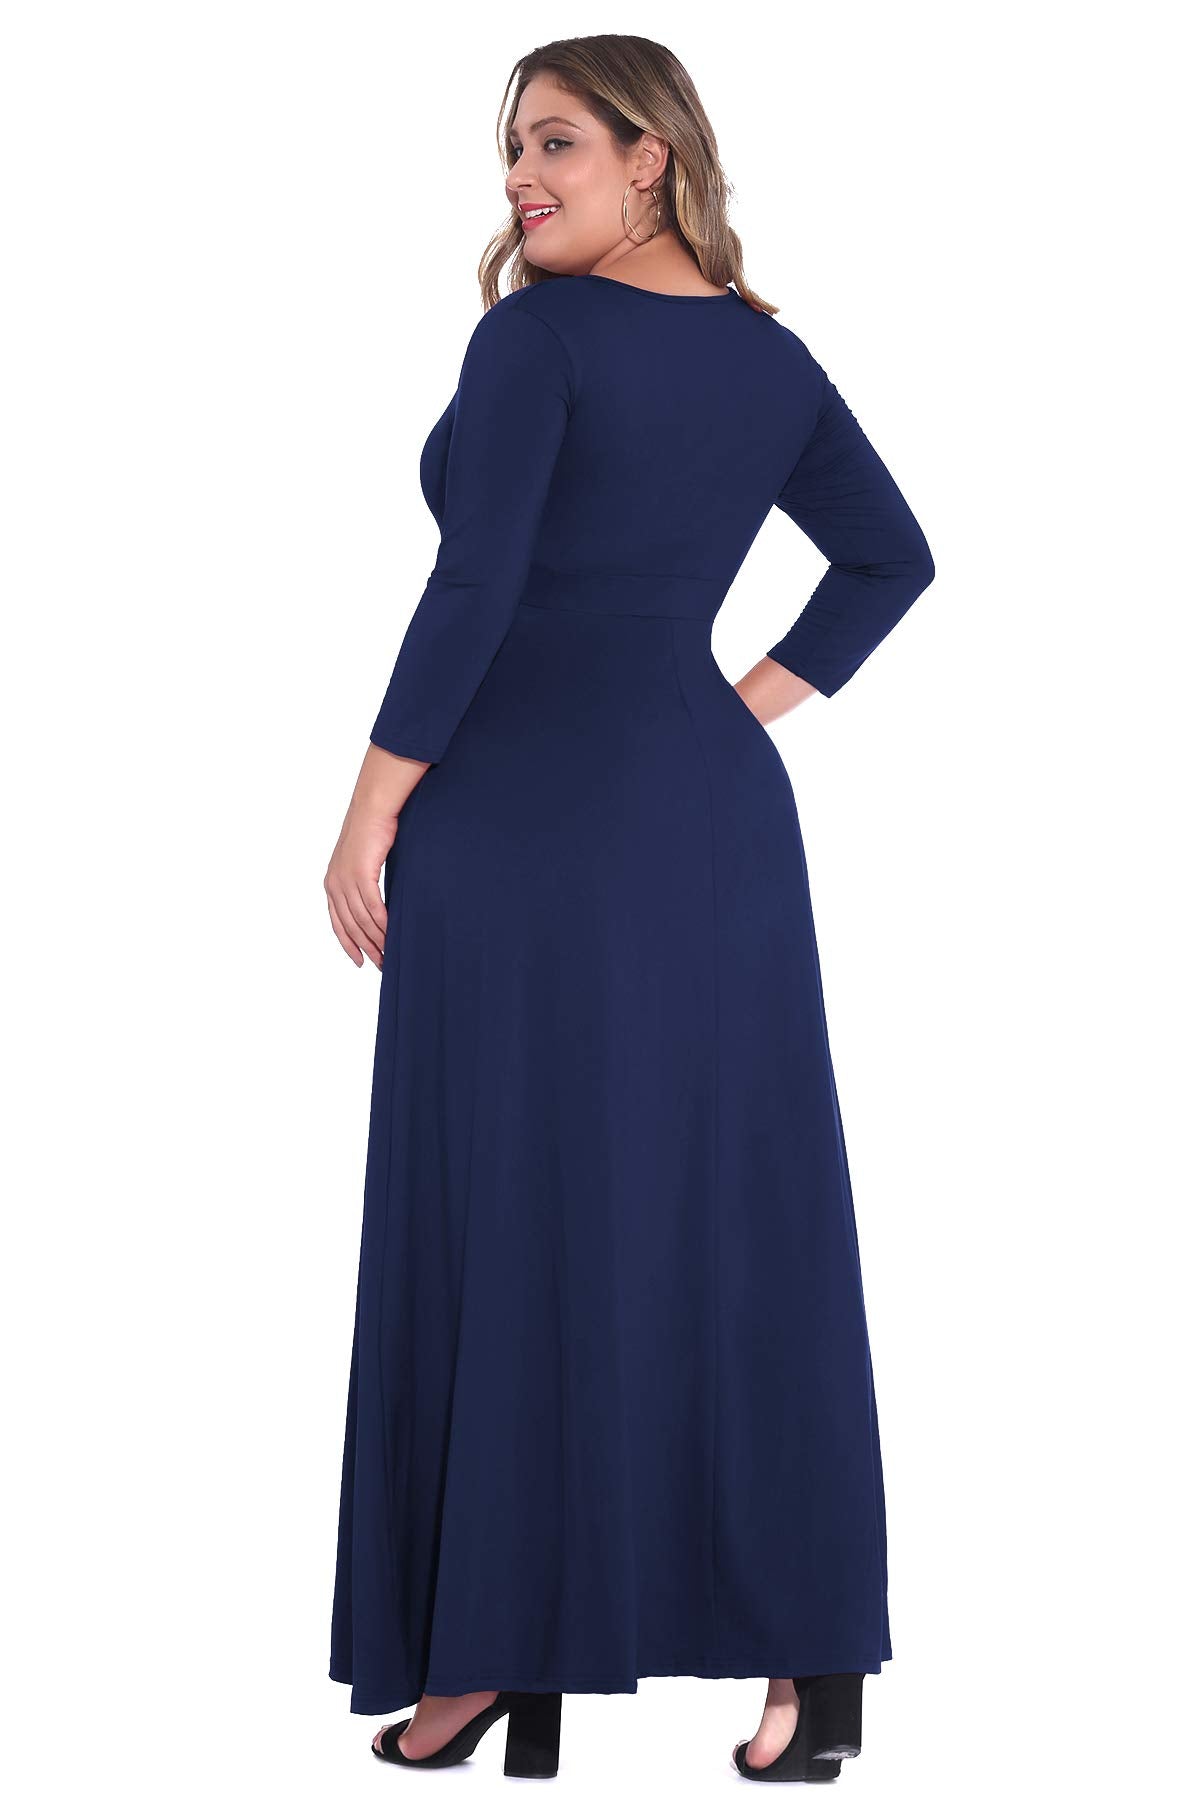 Women's Solid V-Neck 3/4 Sleeve Gowns - POSESHE